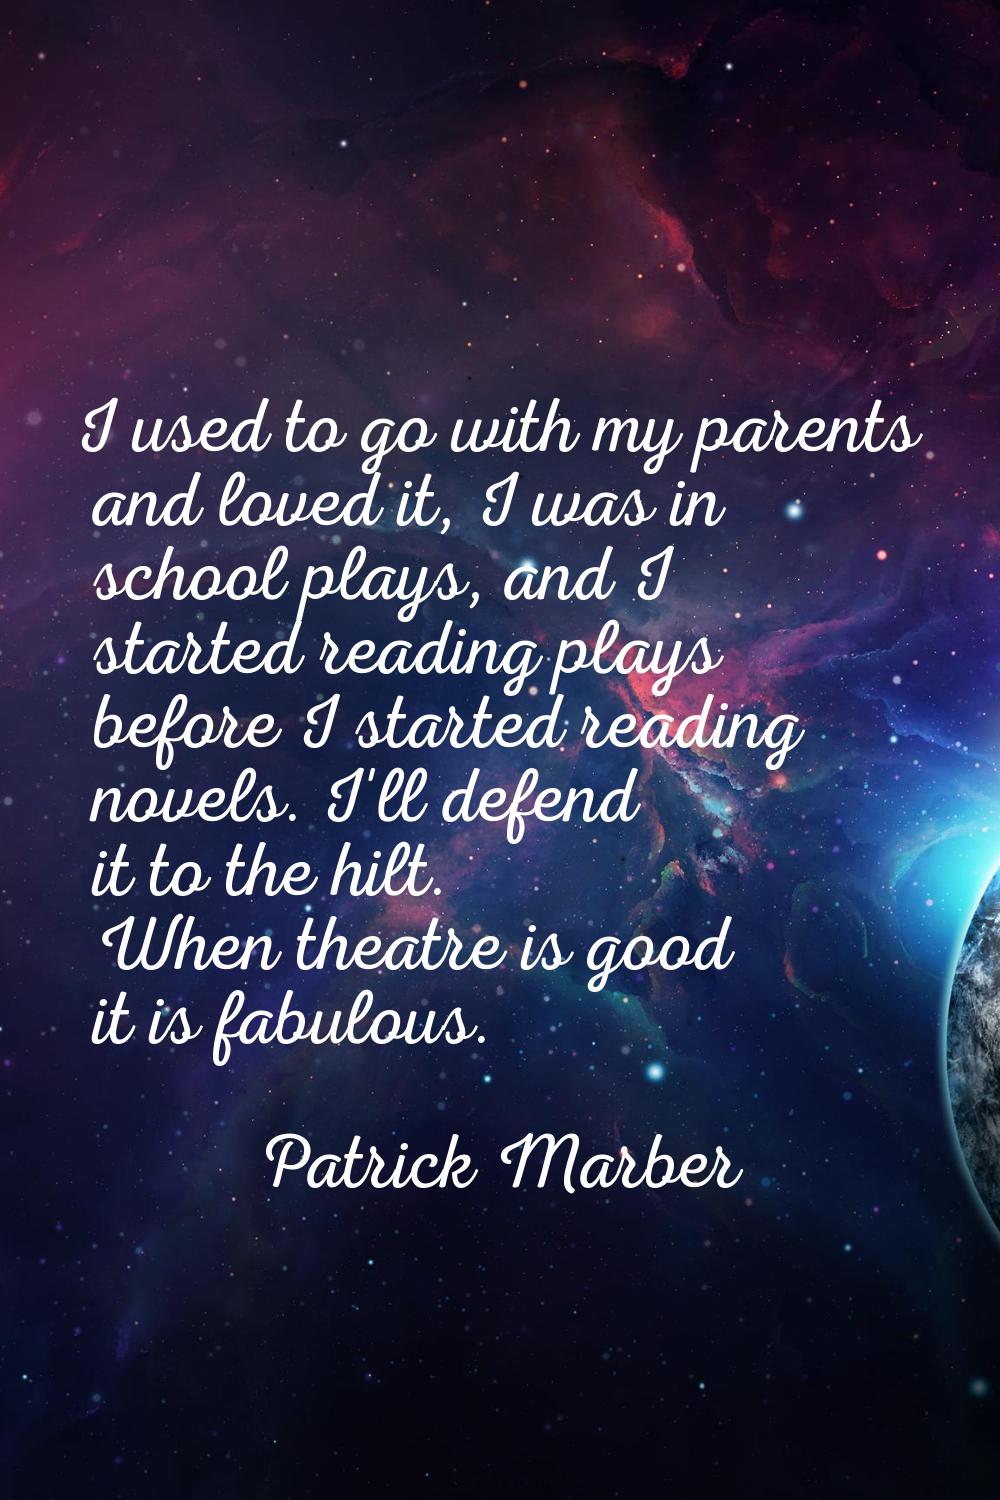 I used to go with my parents and loved it, I was in school plays, and I started reading plays befor